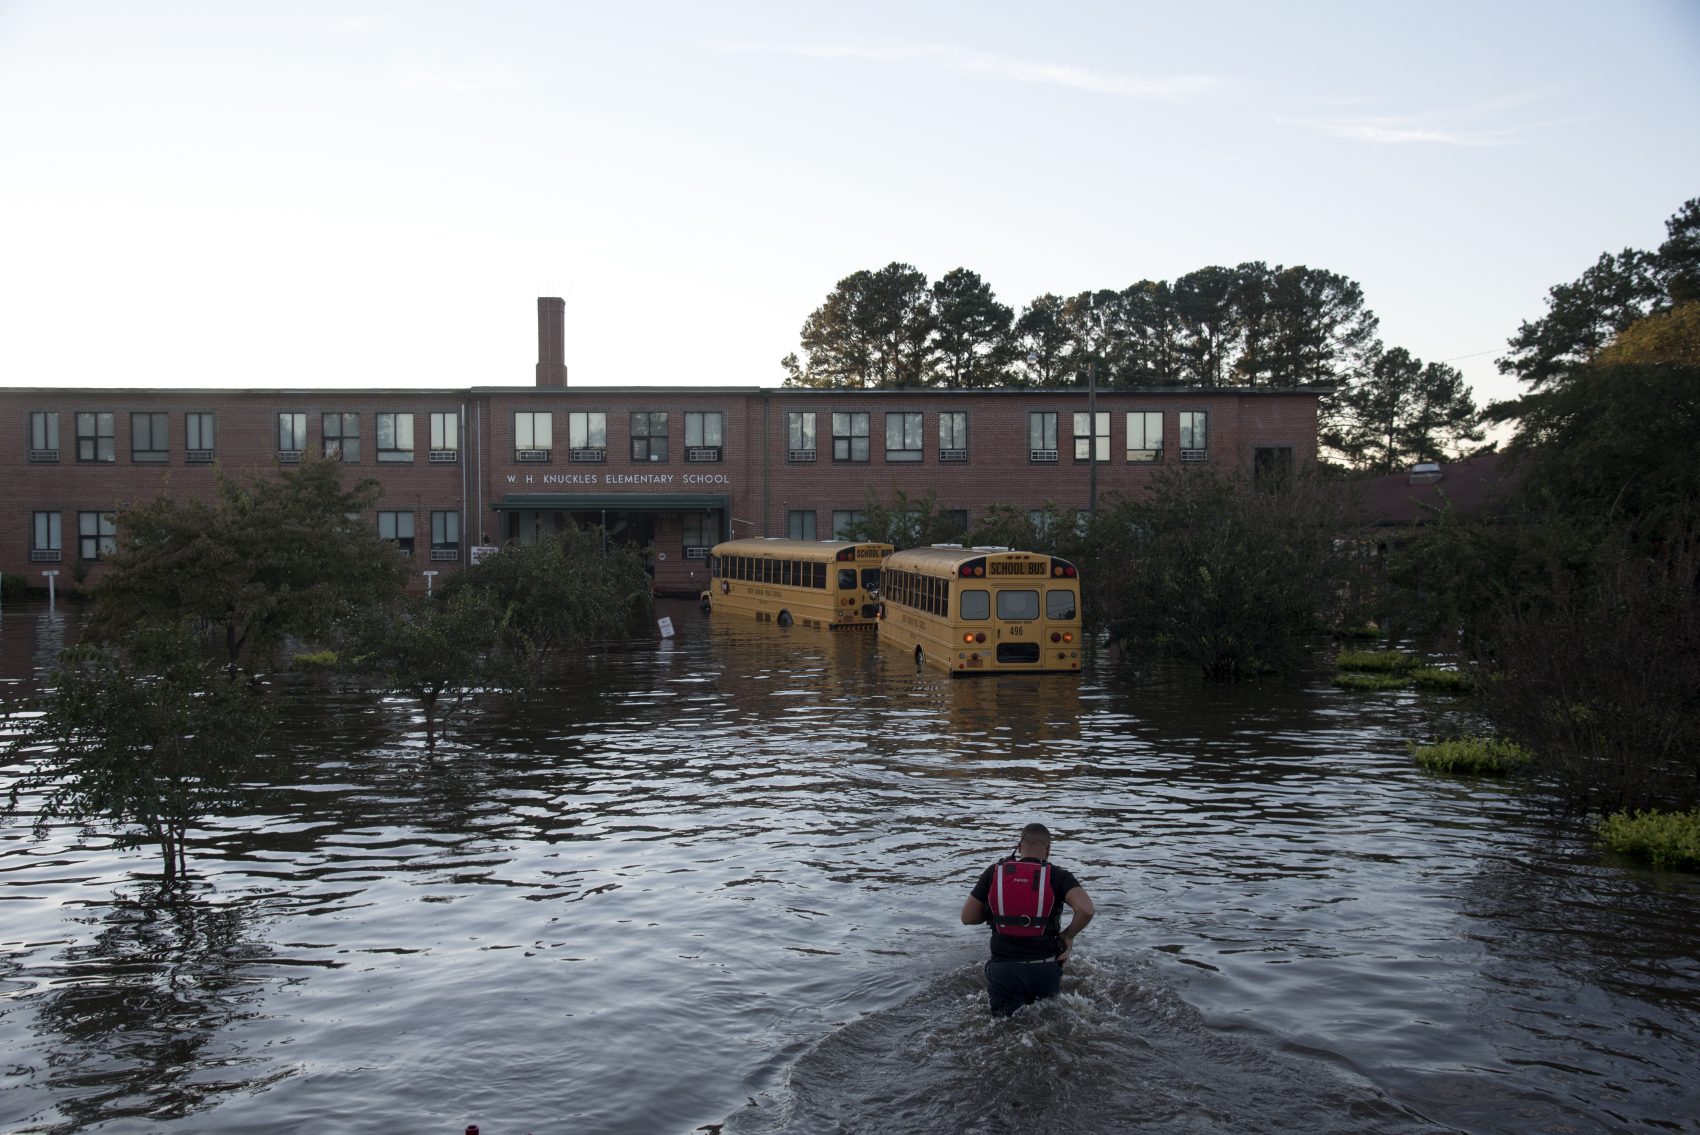 A volunteer firefighter with the Raynham-McDonald Fire Department makes his way through floodwaters caused by rain from Hurricane Matthew to turn off the lights of a school bus in front of W.H. Knuckles Elementary School in Lumberton, N.C., Monday, Oct. 10, 2016. (Mike Spencer/AP)